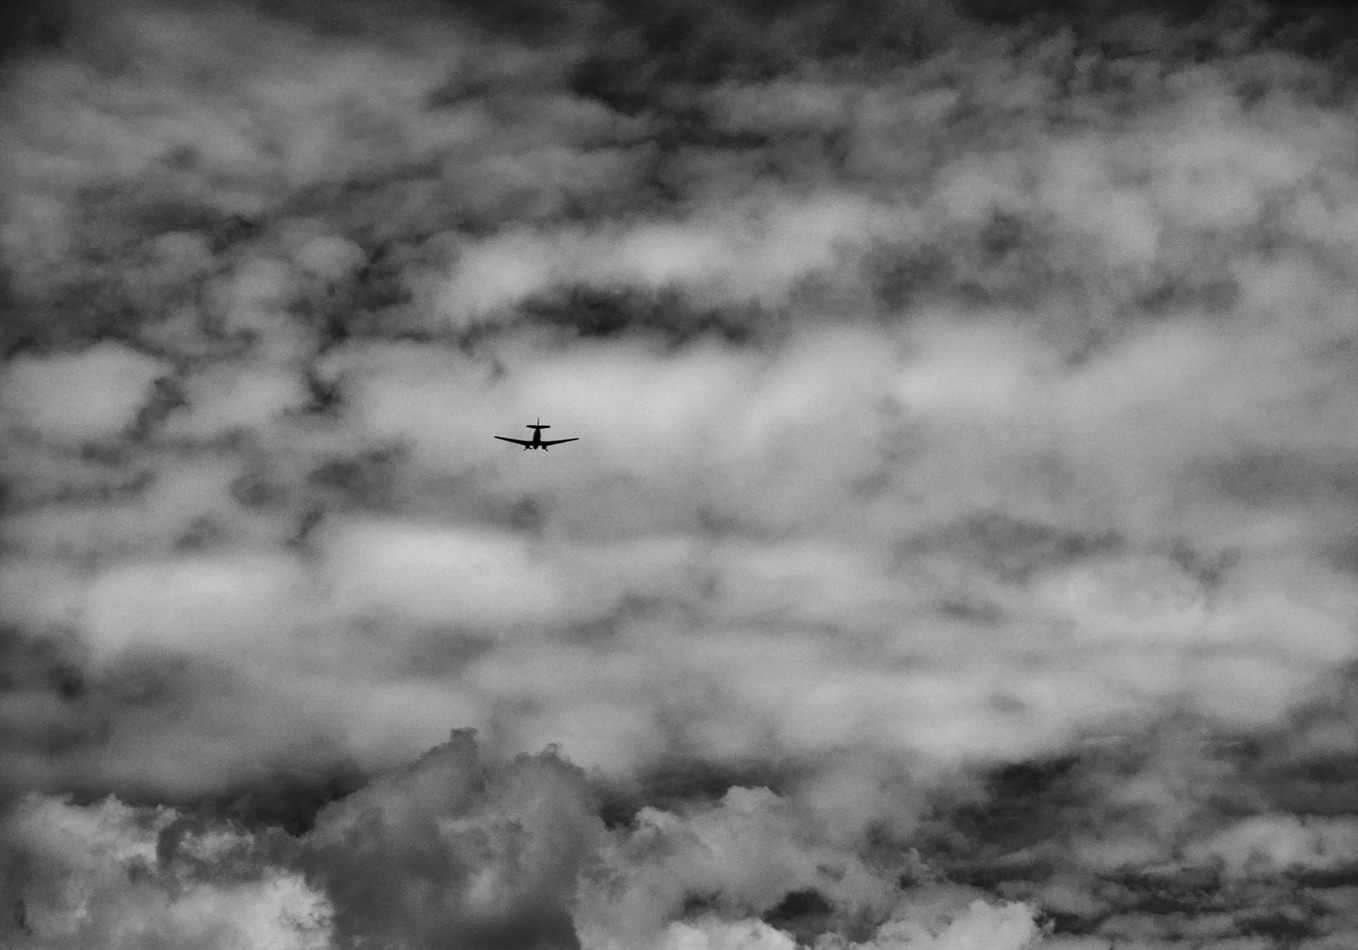 Whisky 7, a C47 which flew on the night of 5 June 1944, flies again over the Norman countryside : D-Day: the Men, the Beaches : David Burnett | Photographer